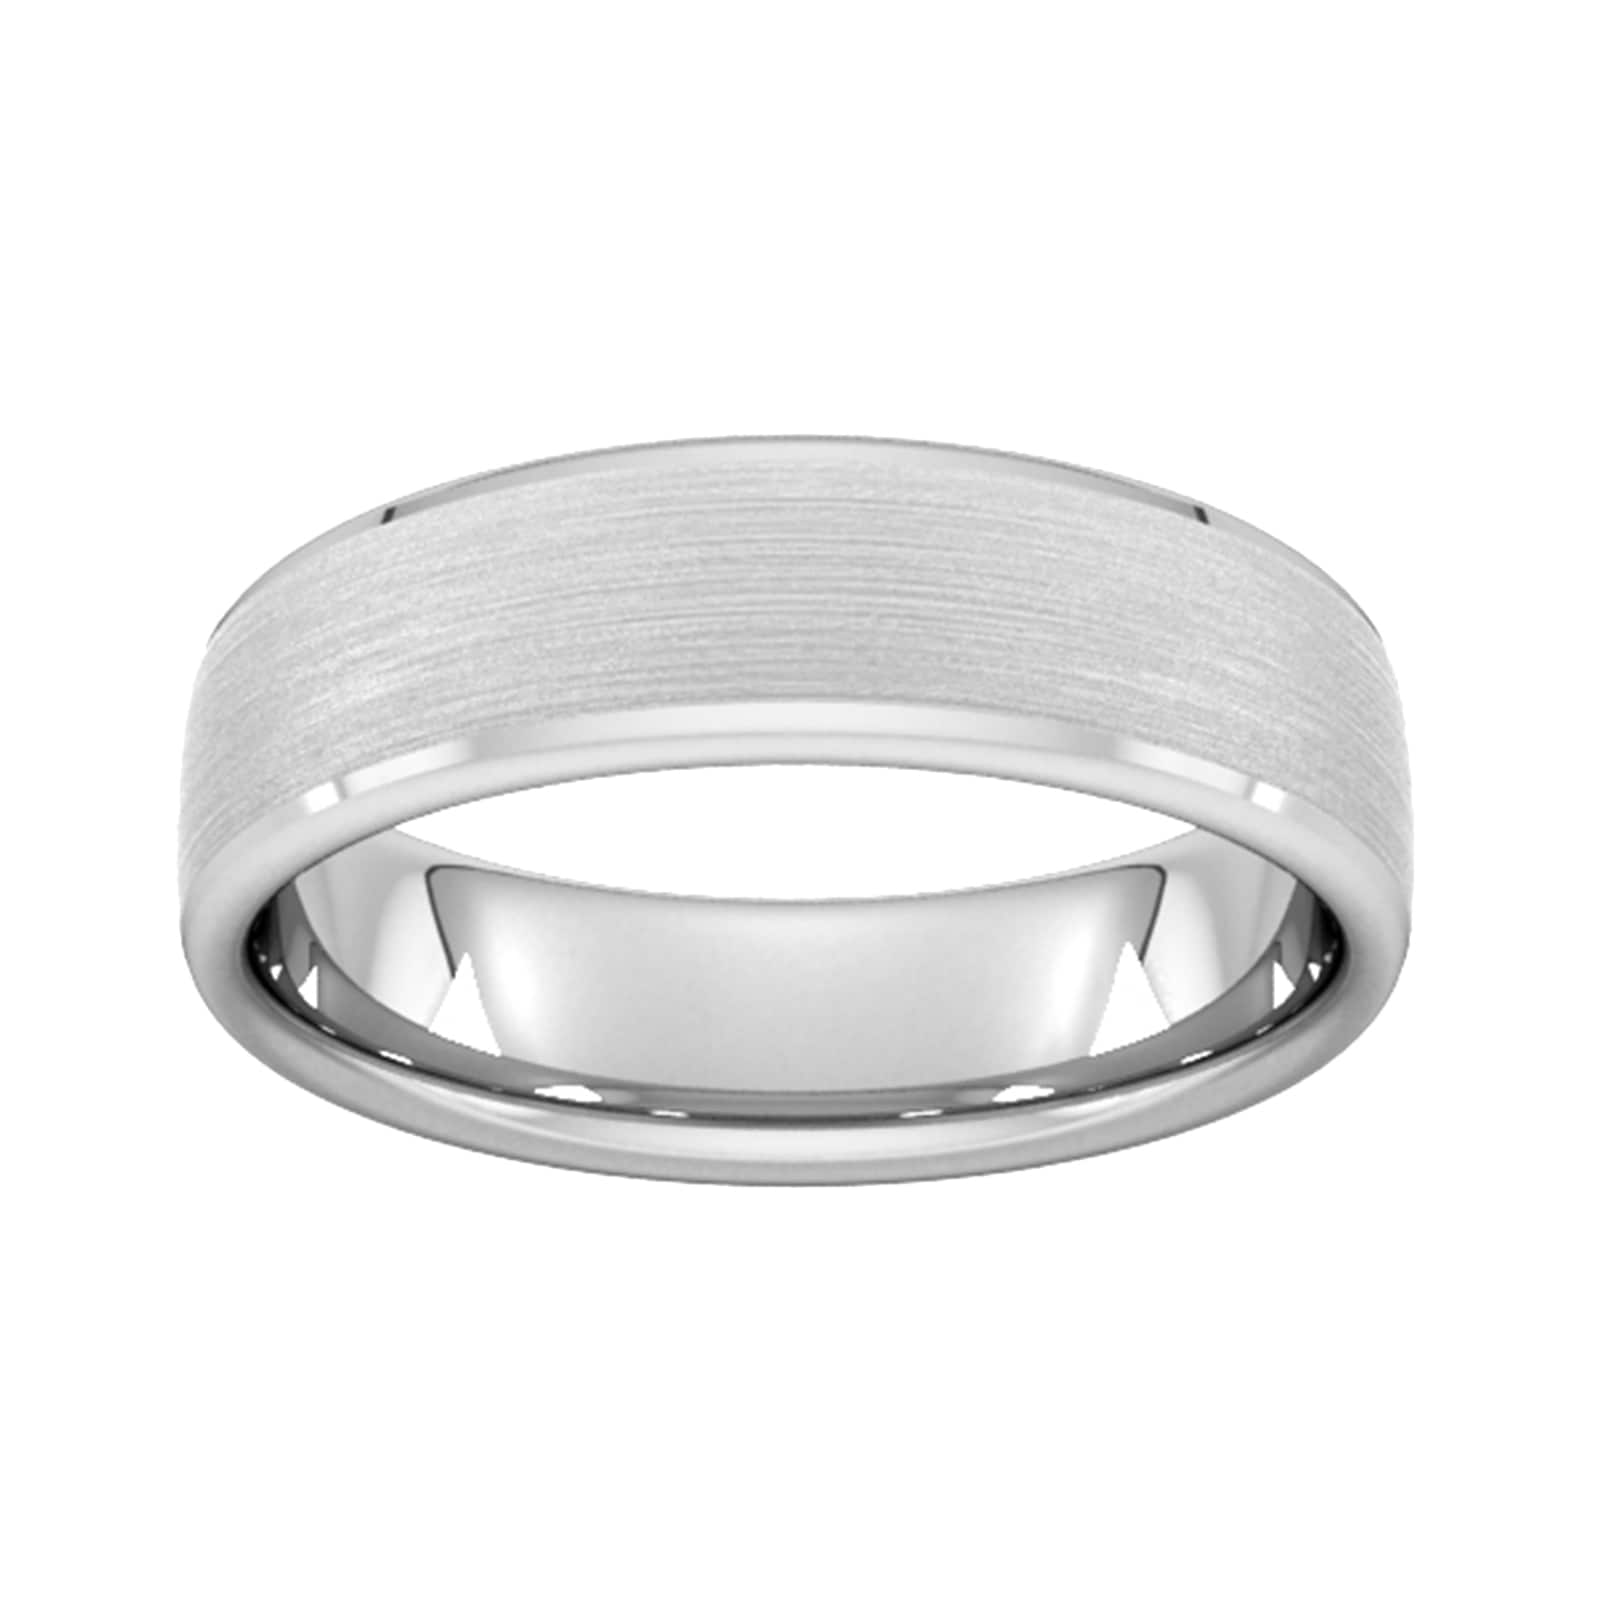 6mm Slight Court Extra Heavy Polished Chamfered Edges With Matt Centre Wedding Ring In 18 Carat White Gold - Ring Size J